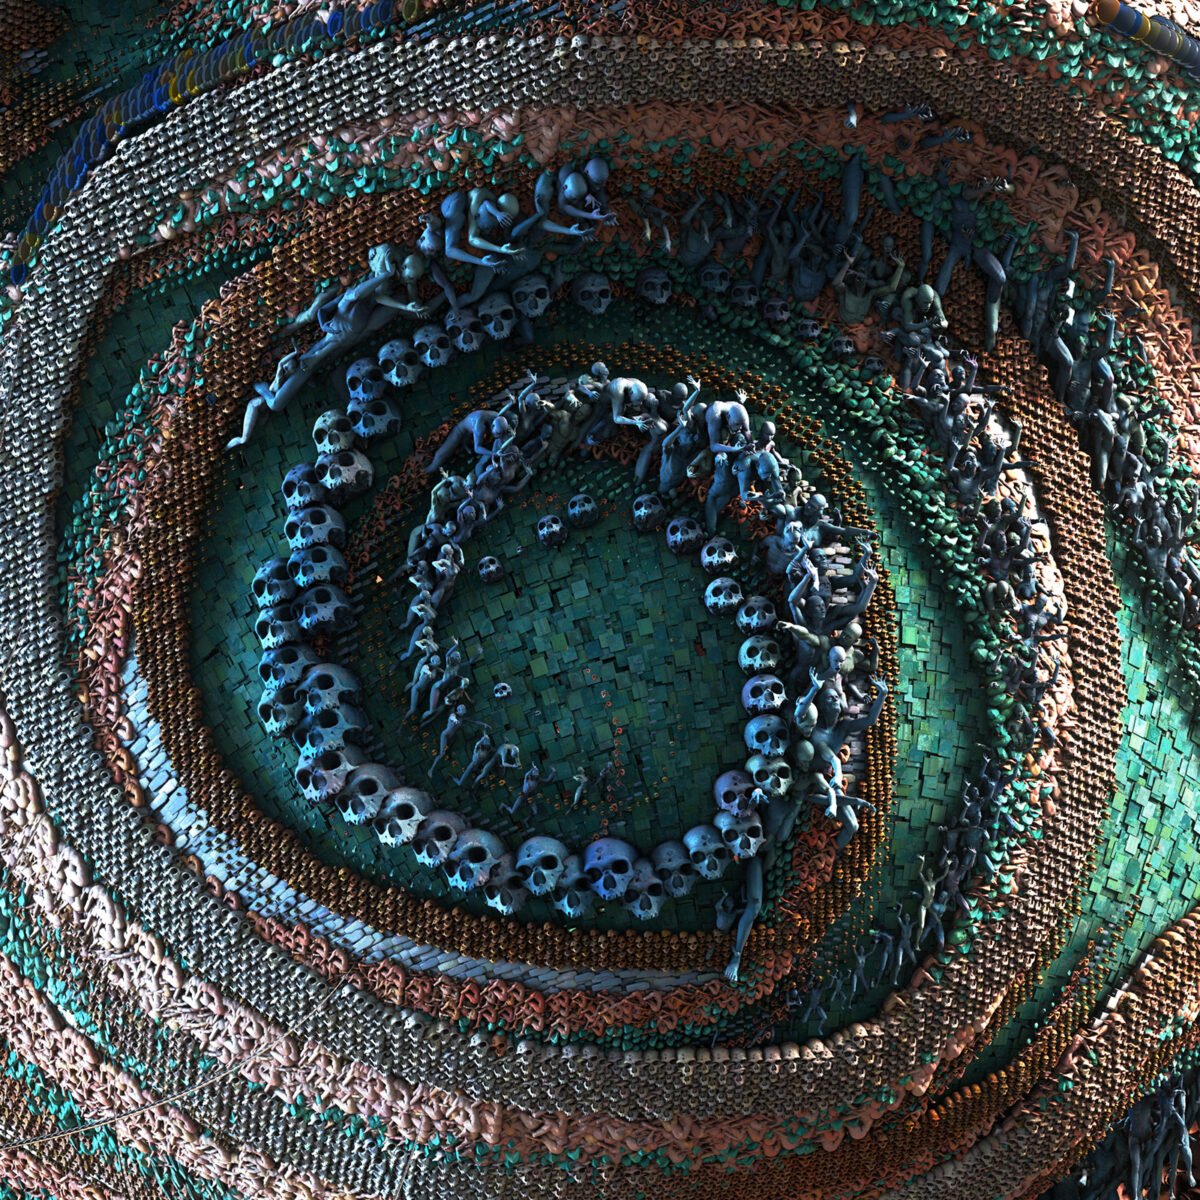 Image with woman made with waves of turquoise plates, skulls and humans bodies. Background with horses and figures of peoples.